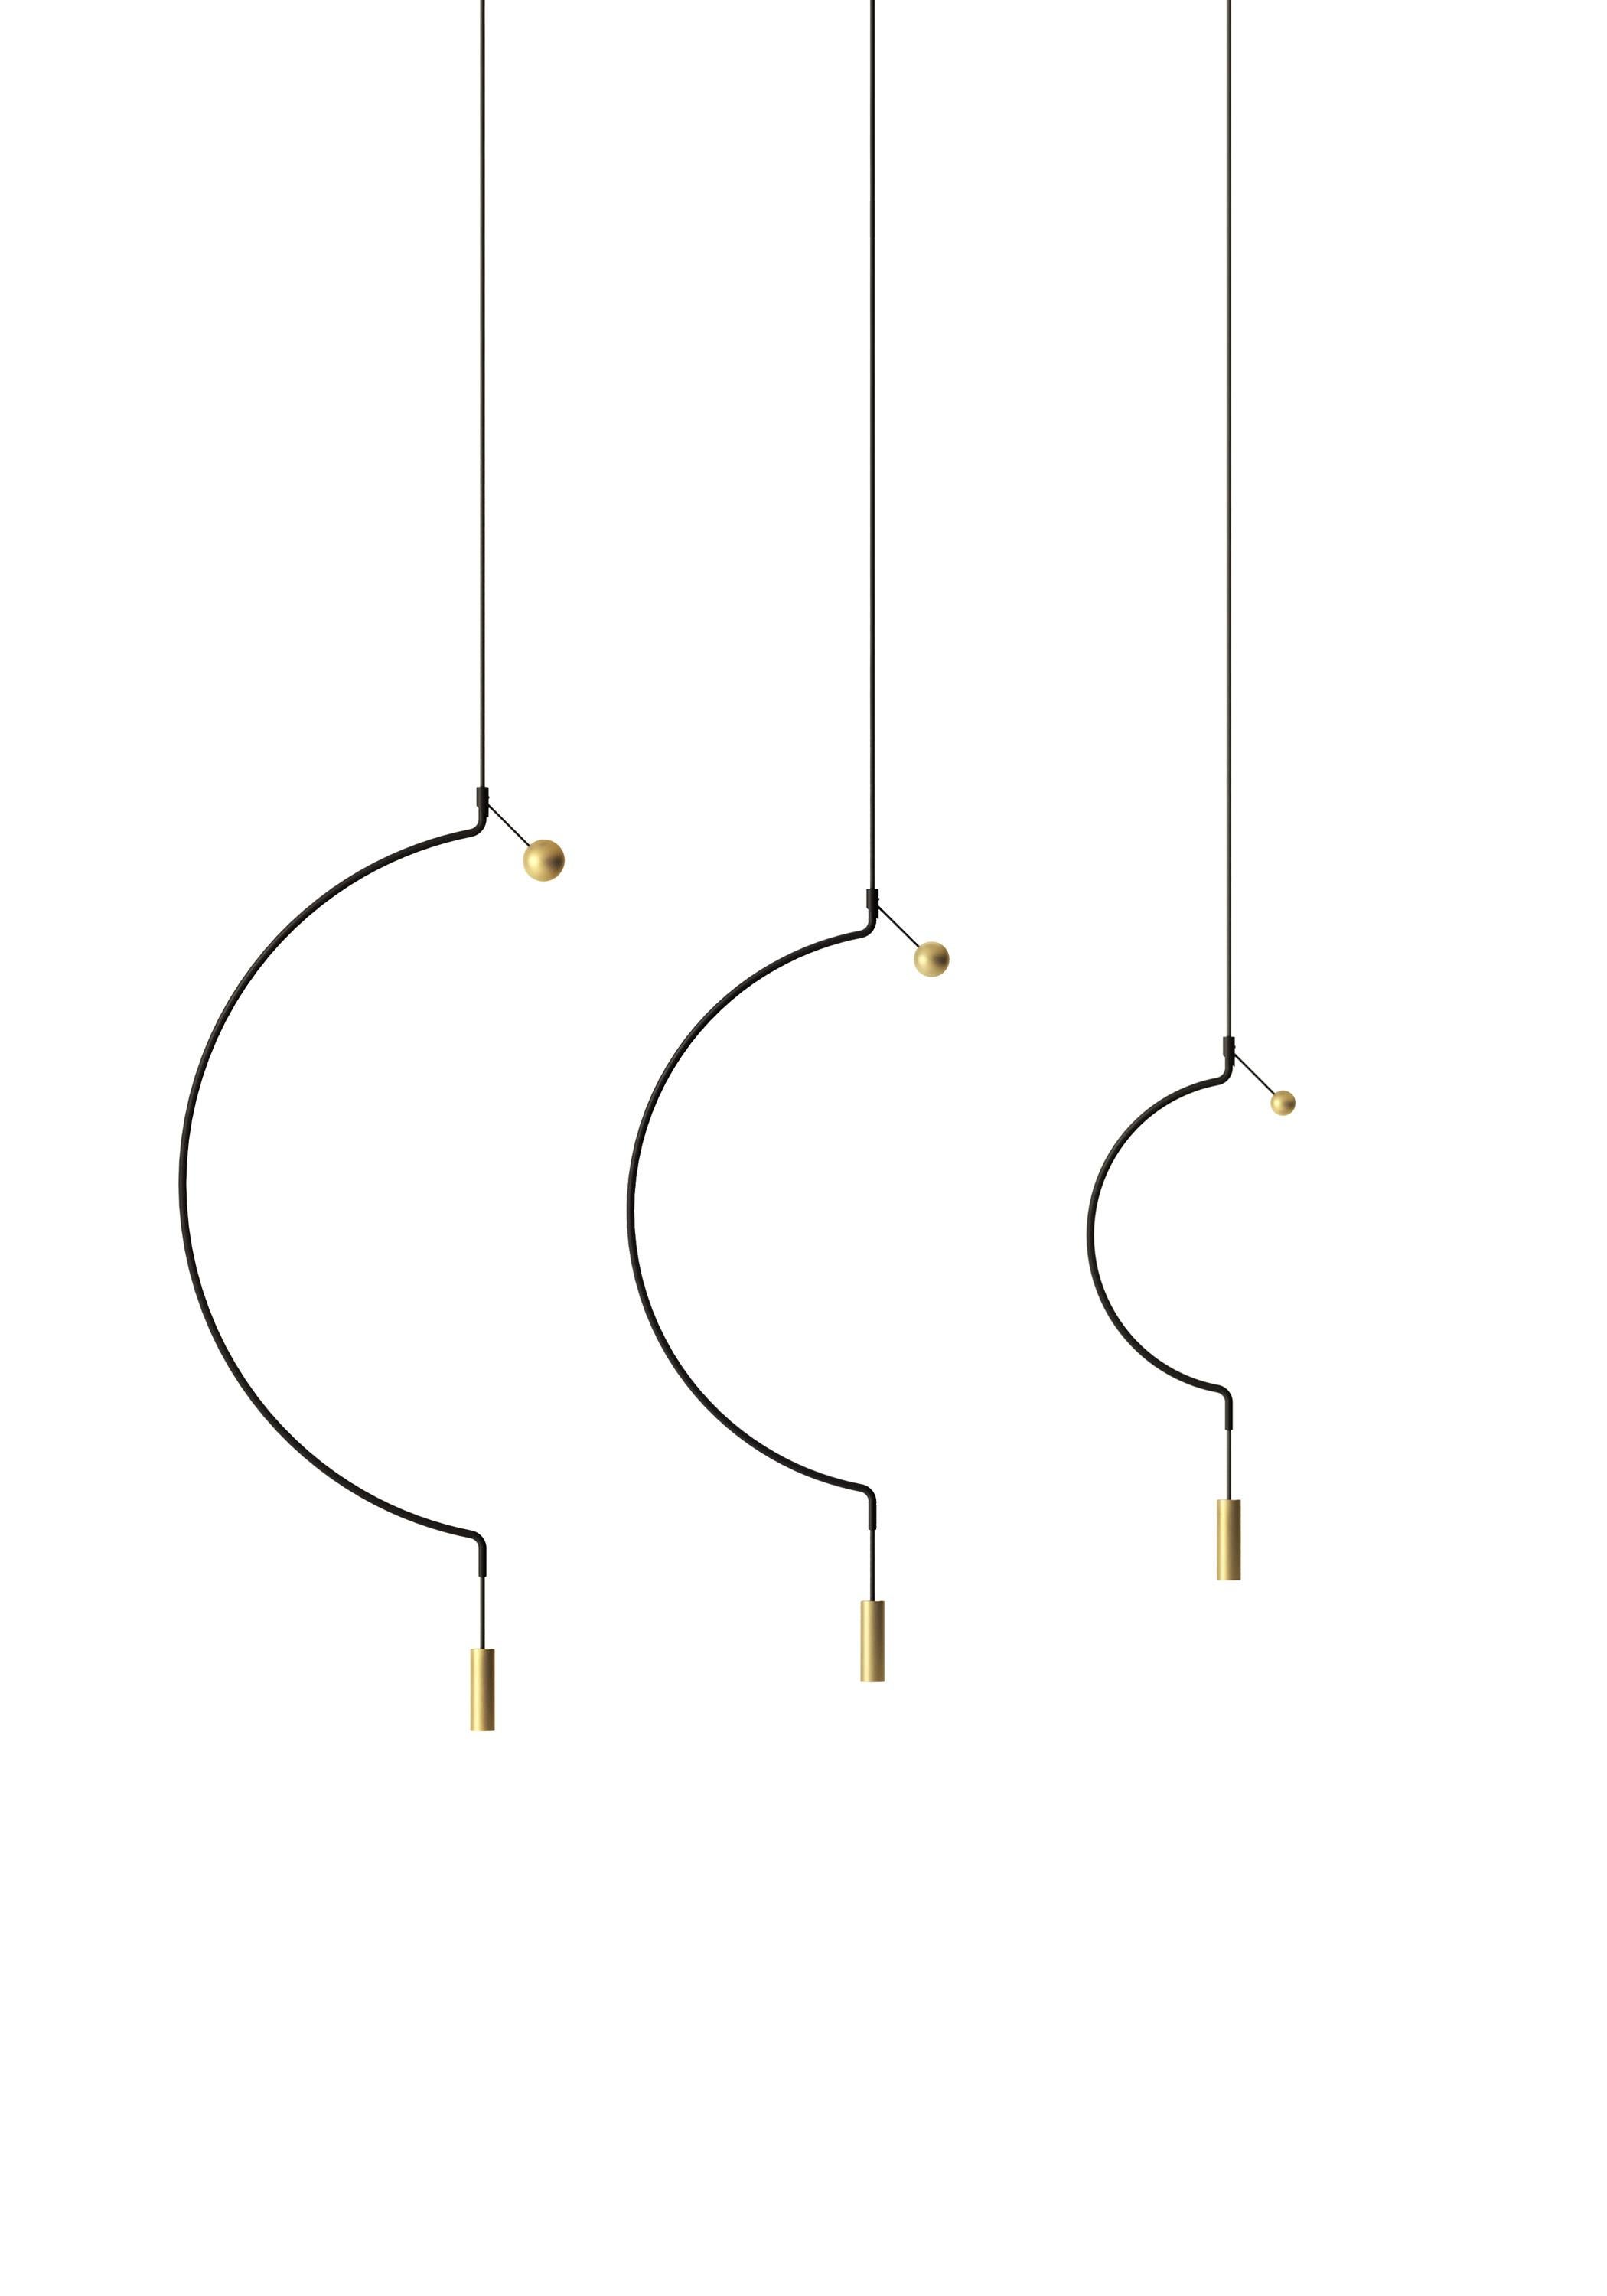 Axolight Liaison Model M1 Pendant Lamp in Gold/Black by Sara Moroni

Modular lightness and elegance. Liaison tells about the perfect balance of three geometric archetypes: sphere, circle and cylinder compose a system that includes the single pendant